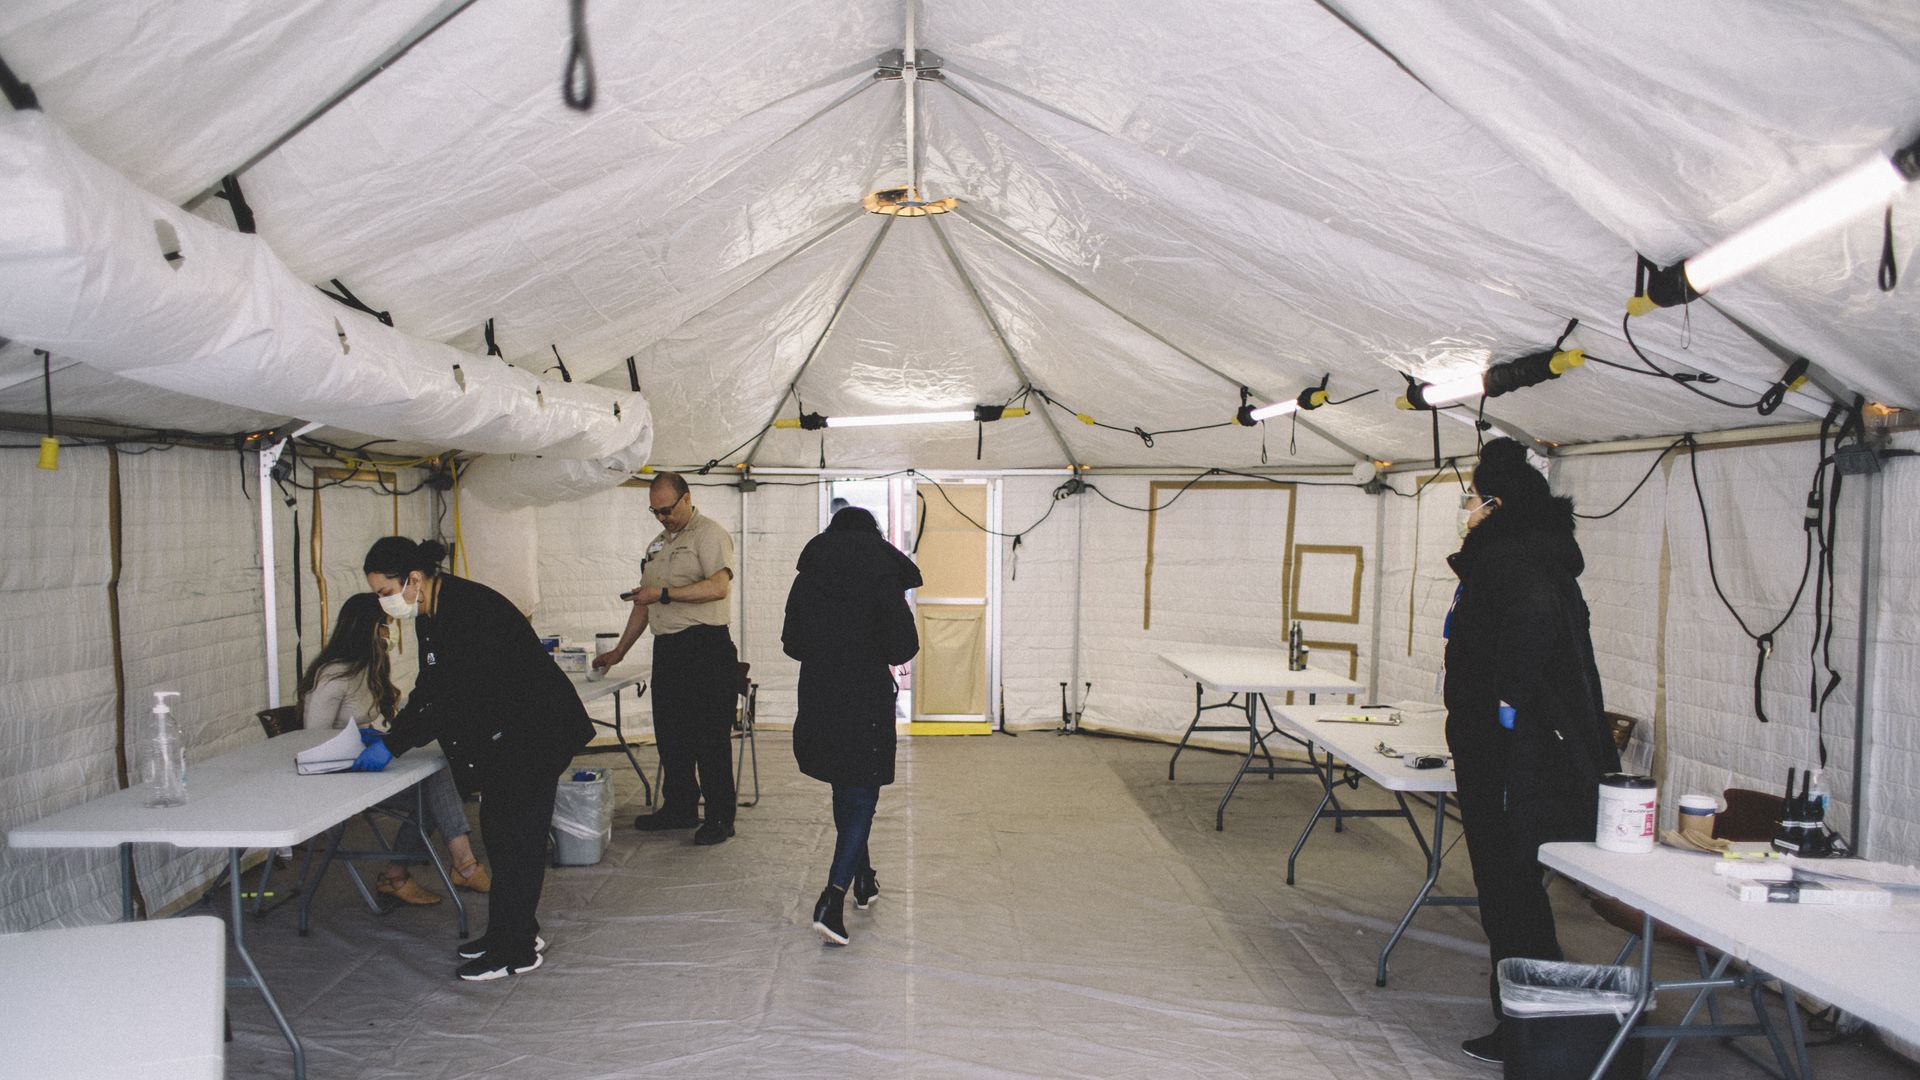 In this image, people stand in a white tent